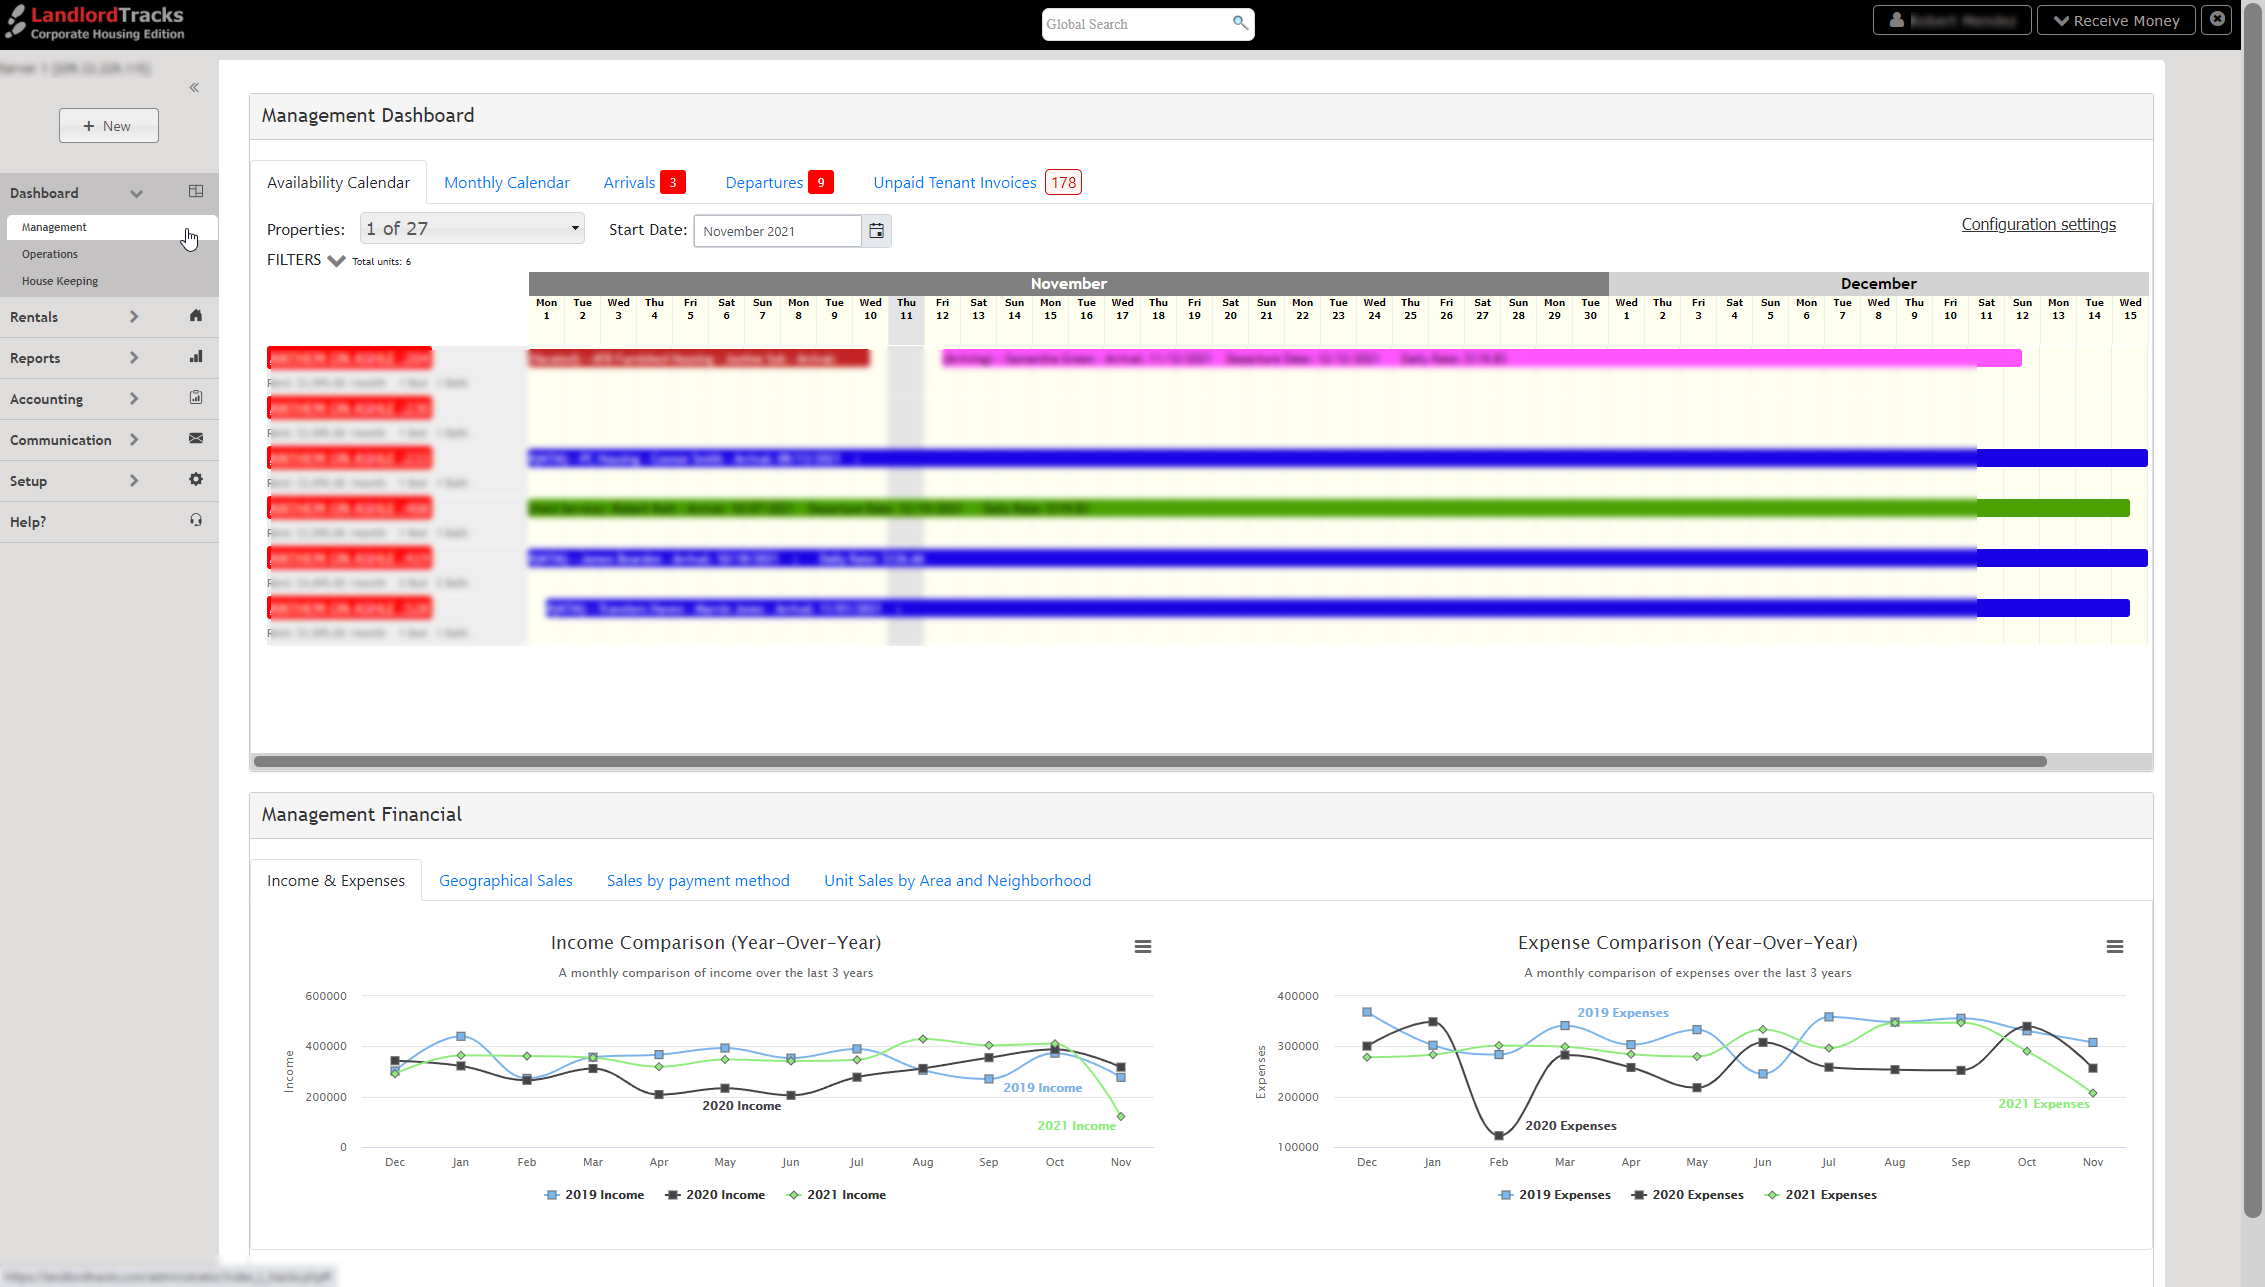 Management Dashboards, availability and monthly calendars, easy to use interface